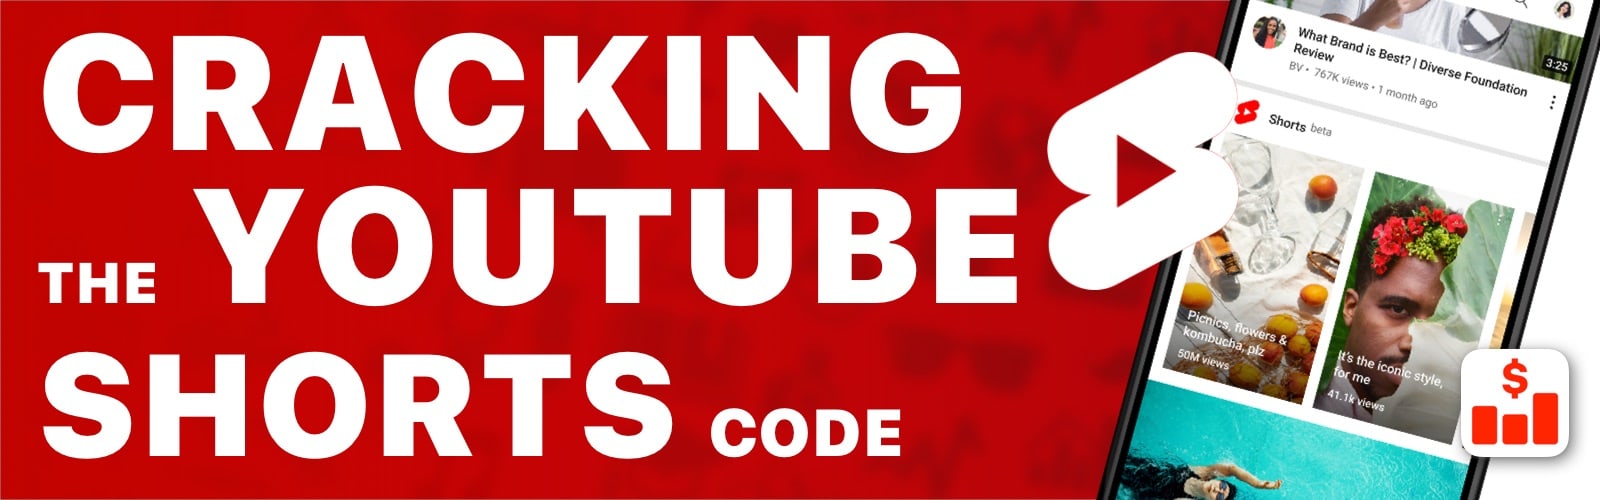 Cracking the YouTube Shorts Code: Your Ticket to Millions of Views